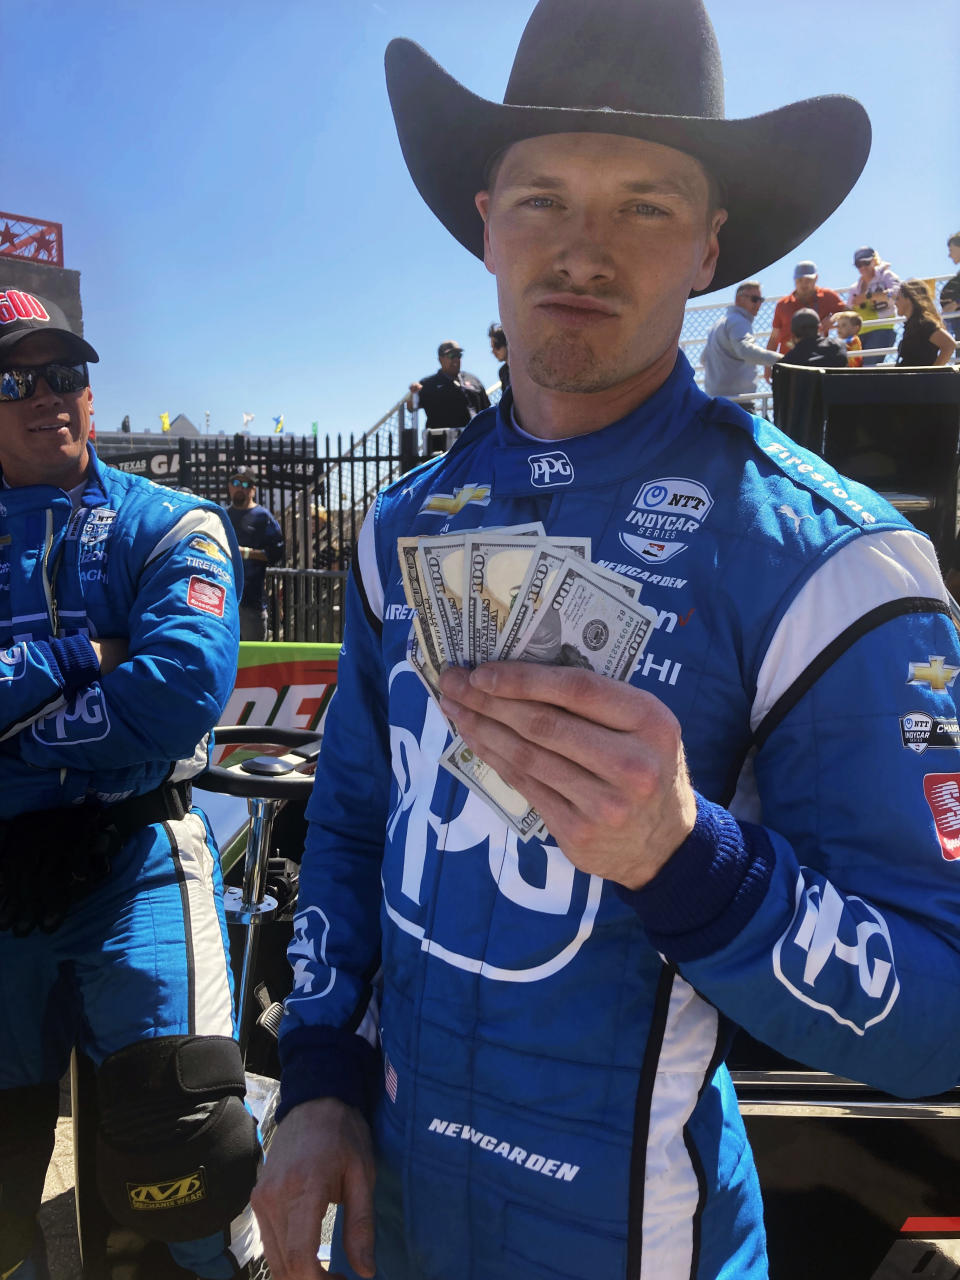 Josef Newgarden shows the $600 bonus that Roger Penske paid him in Victory Lane at Texas Motor Speedway in Fort Worth, Texas, after Newgarden won the 600th race in Team Penske history, Sunday, March 20, 2022. (AP Photo/Jenna Fryer)